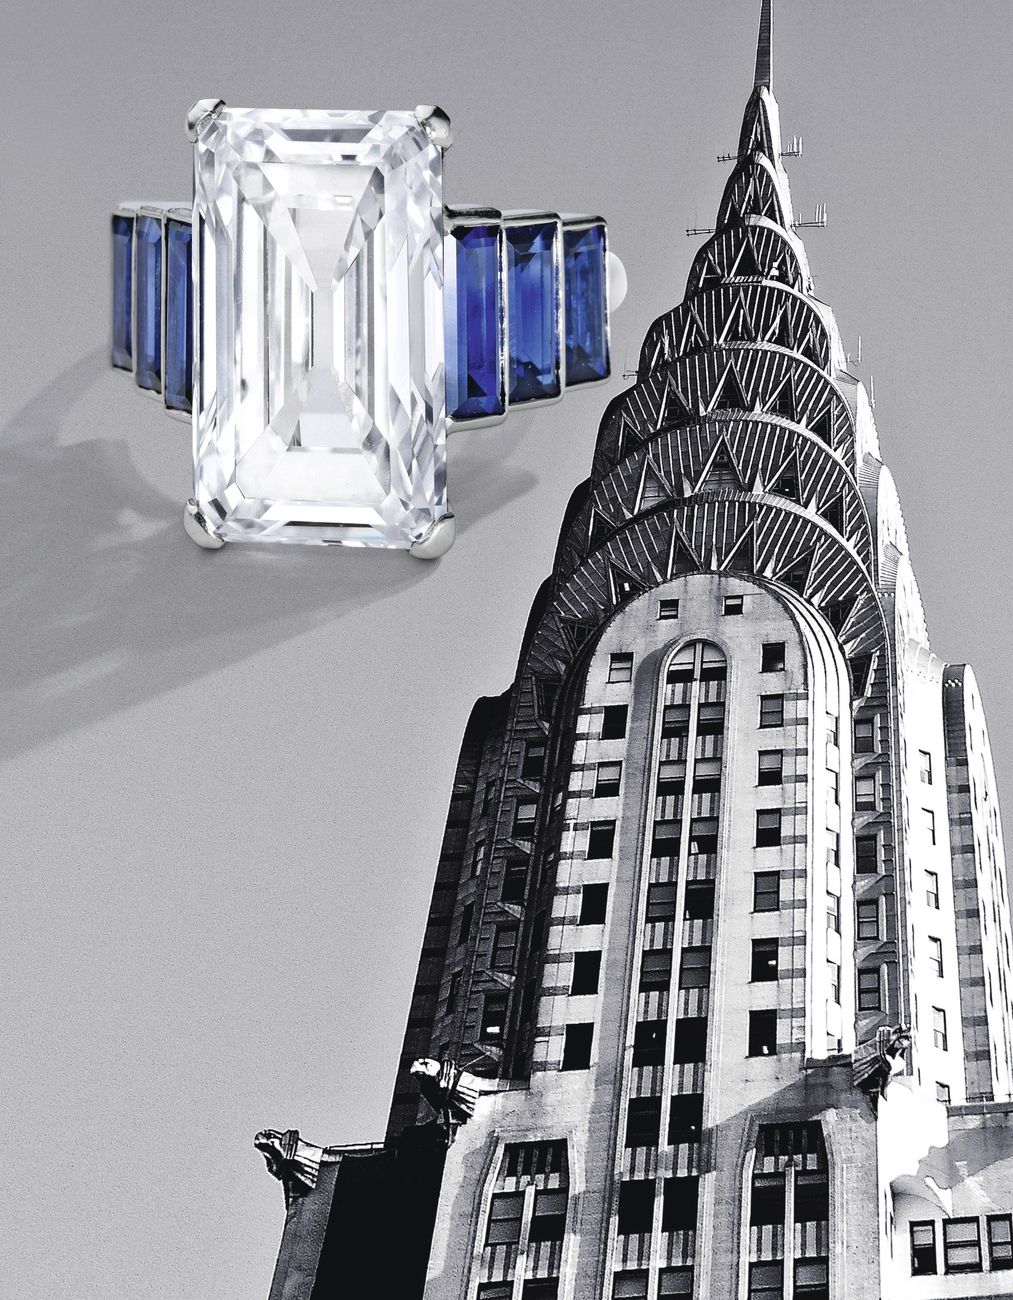 Lot 251 -Art Deco Platinum, Diamond and Sapphire Ring, France, with the ART Deco New York Chrysler Building in the background, both depicting geometric features characteristic of this period